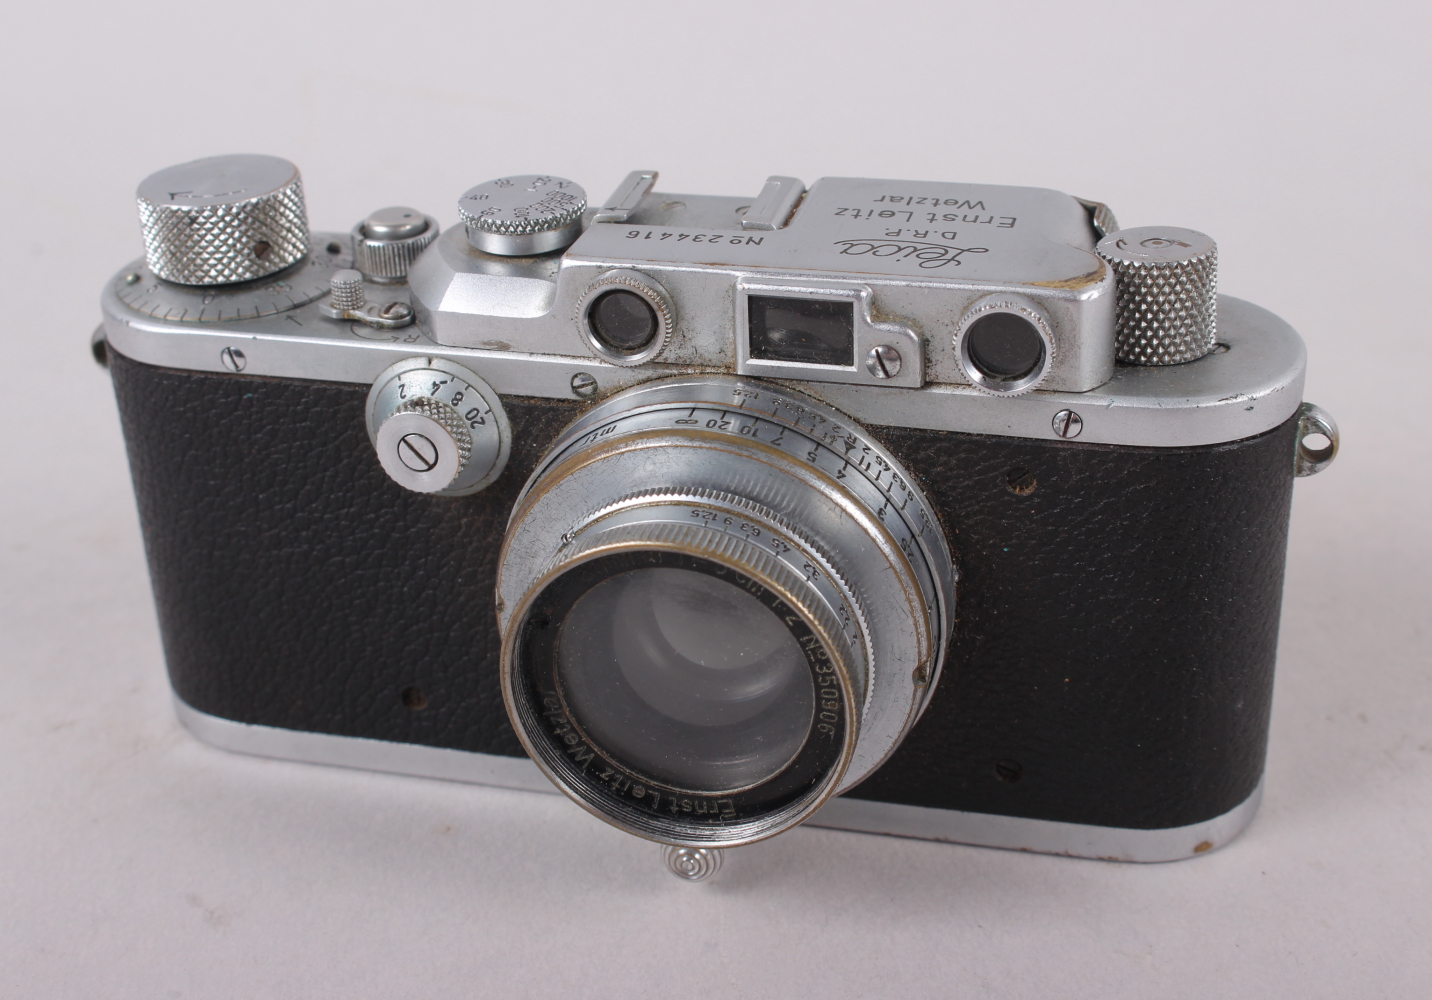 A Leica D R P Rangefinder camera, No 234416, summar f=5cm 1:2 No 350906 lens, in leather case - Image 6 of 9